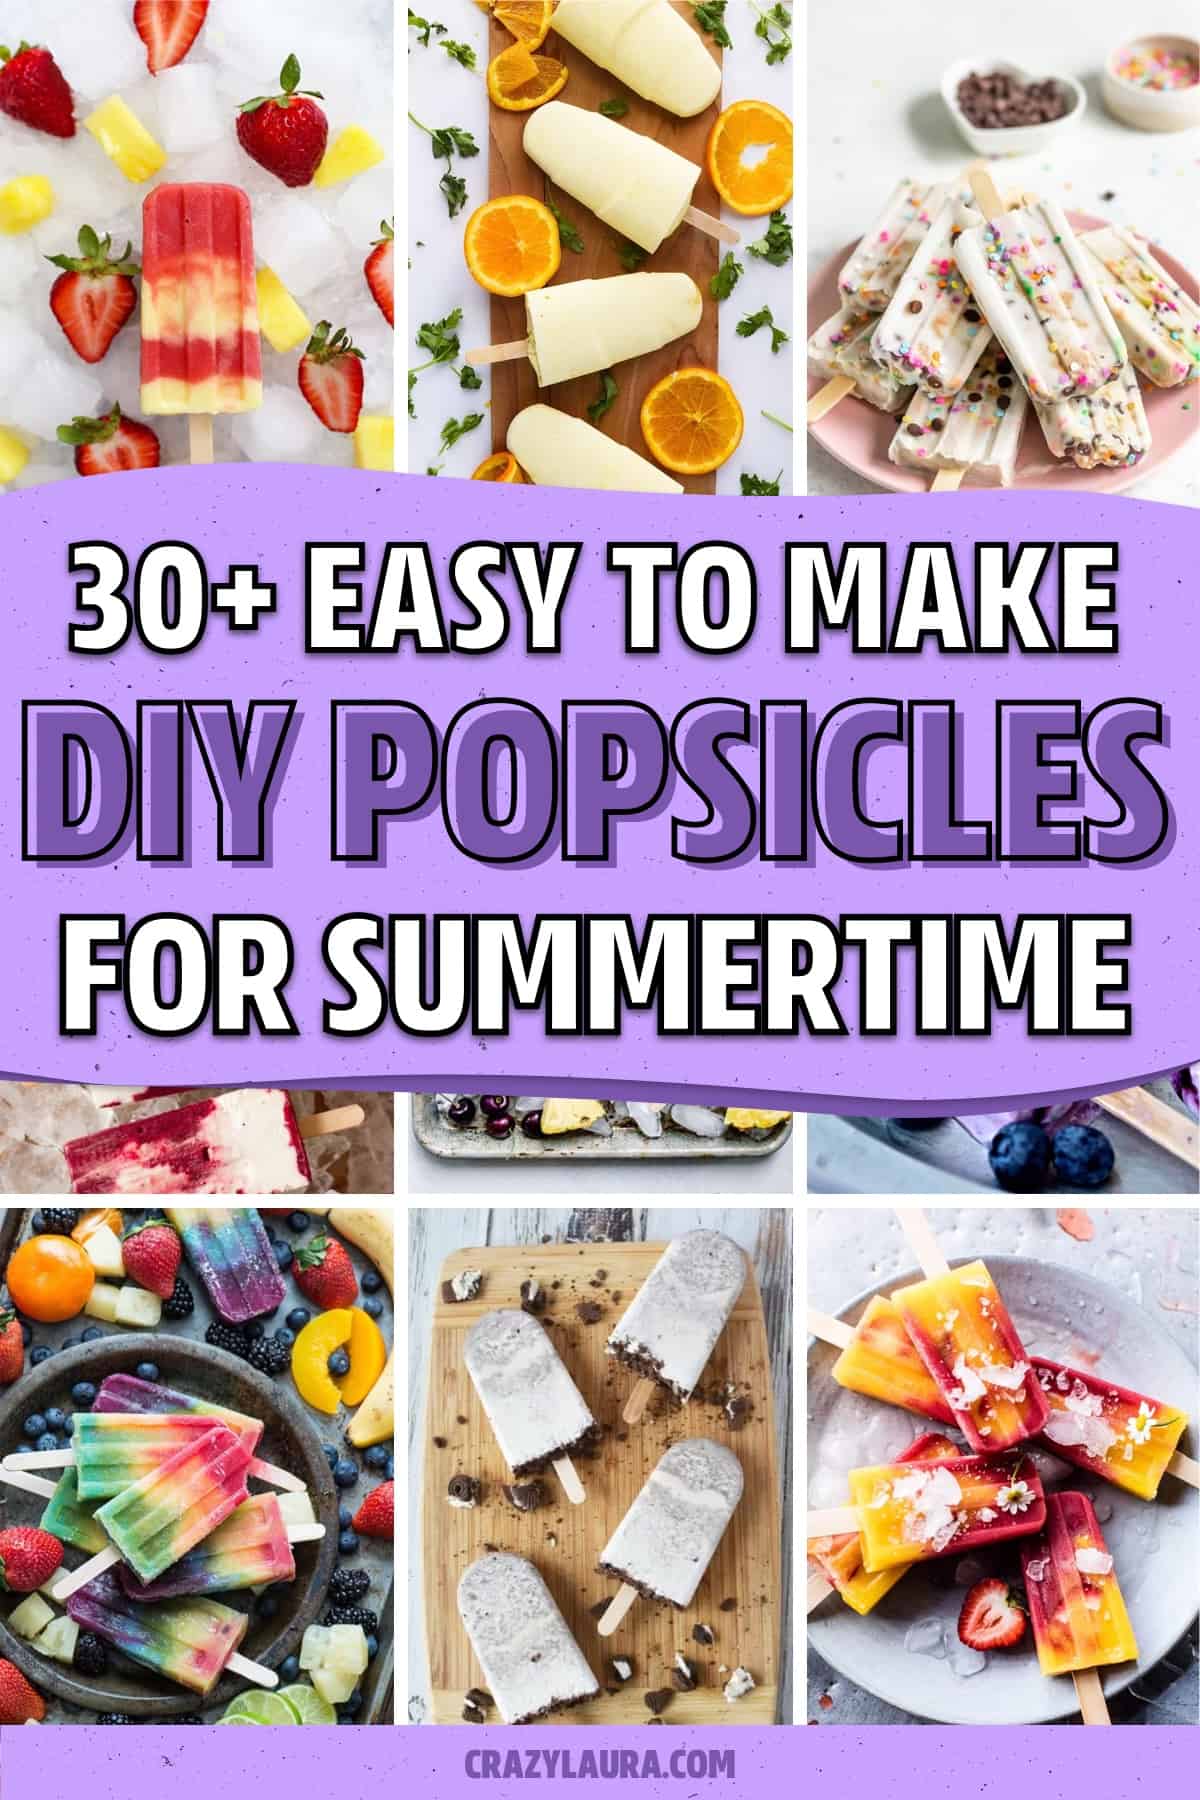 recipe ideas to make popsicles